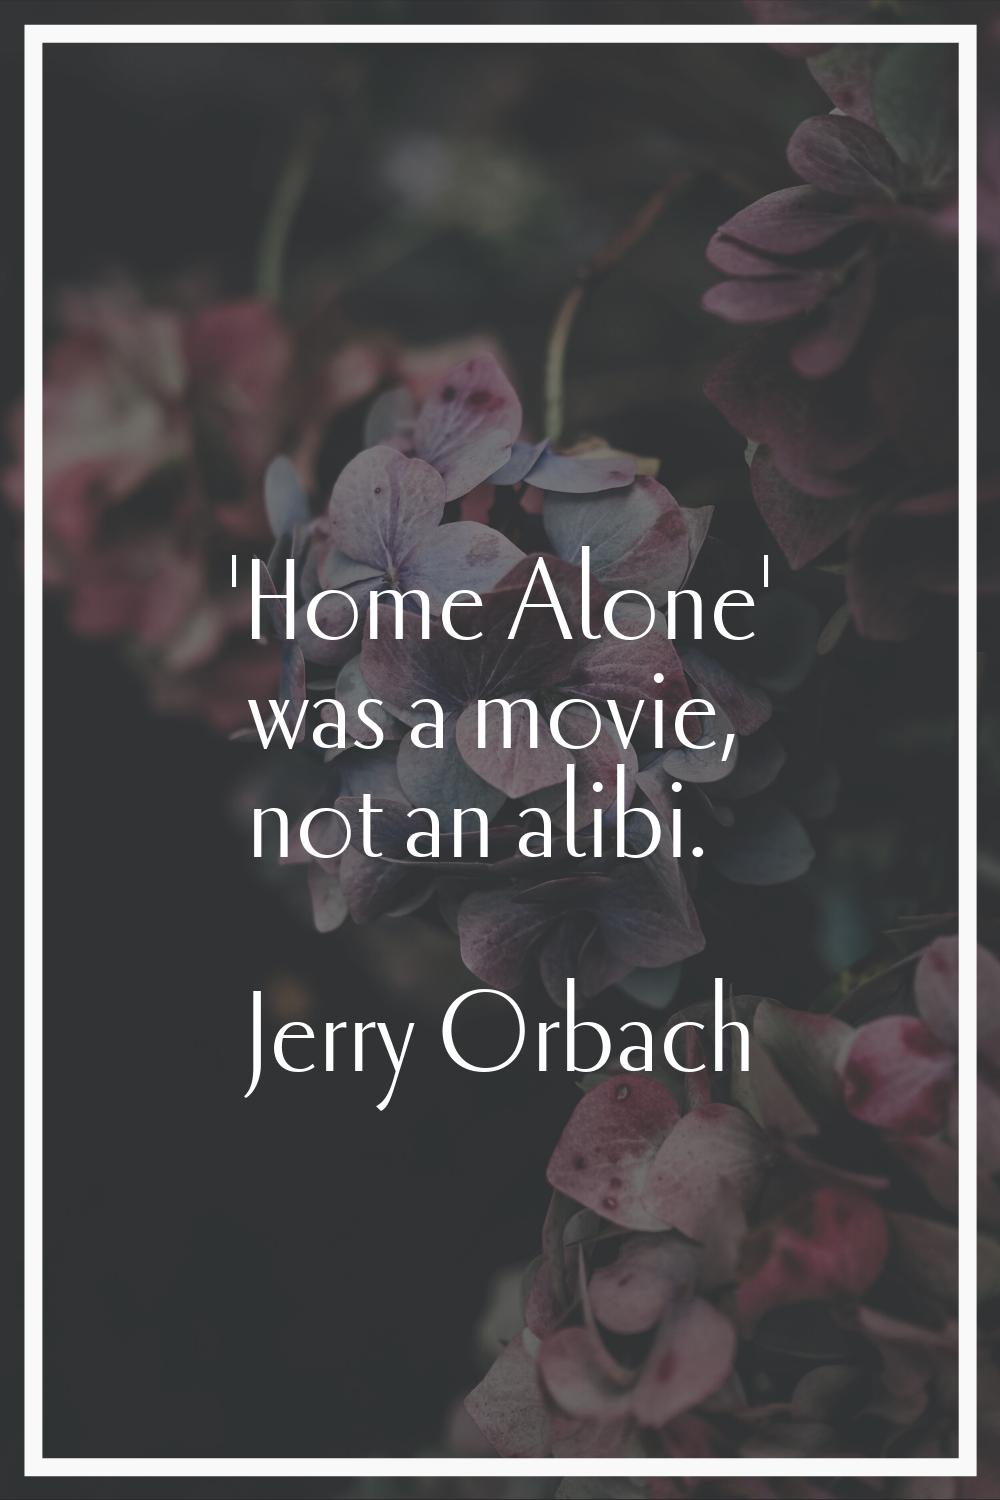 'Home Alone' was a movie, not an alibi.